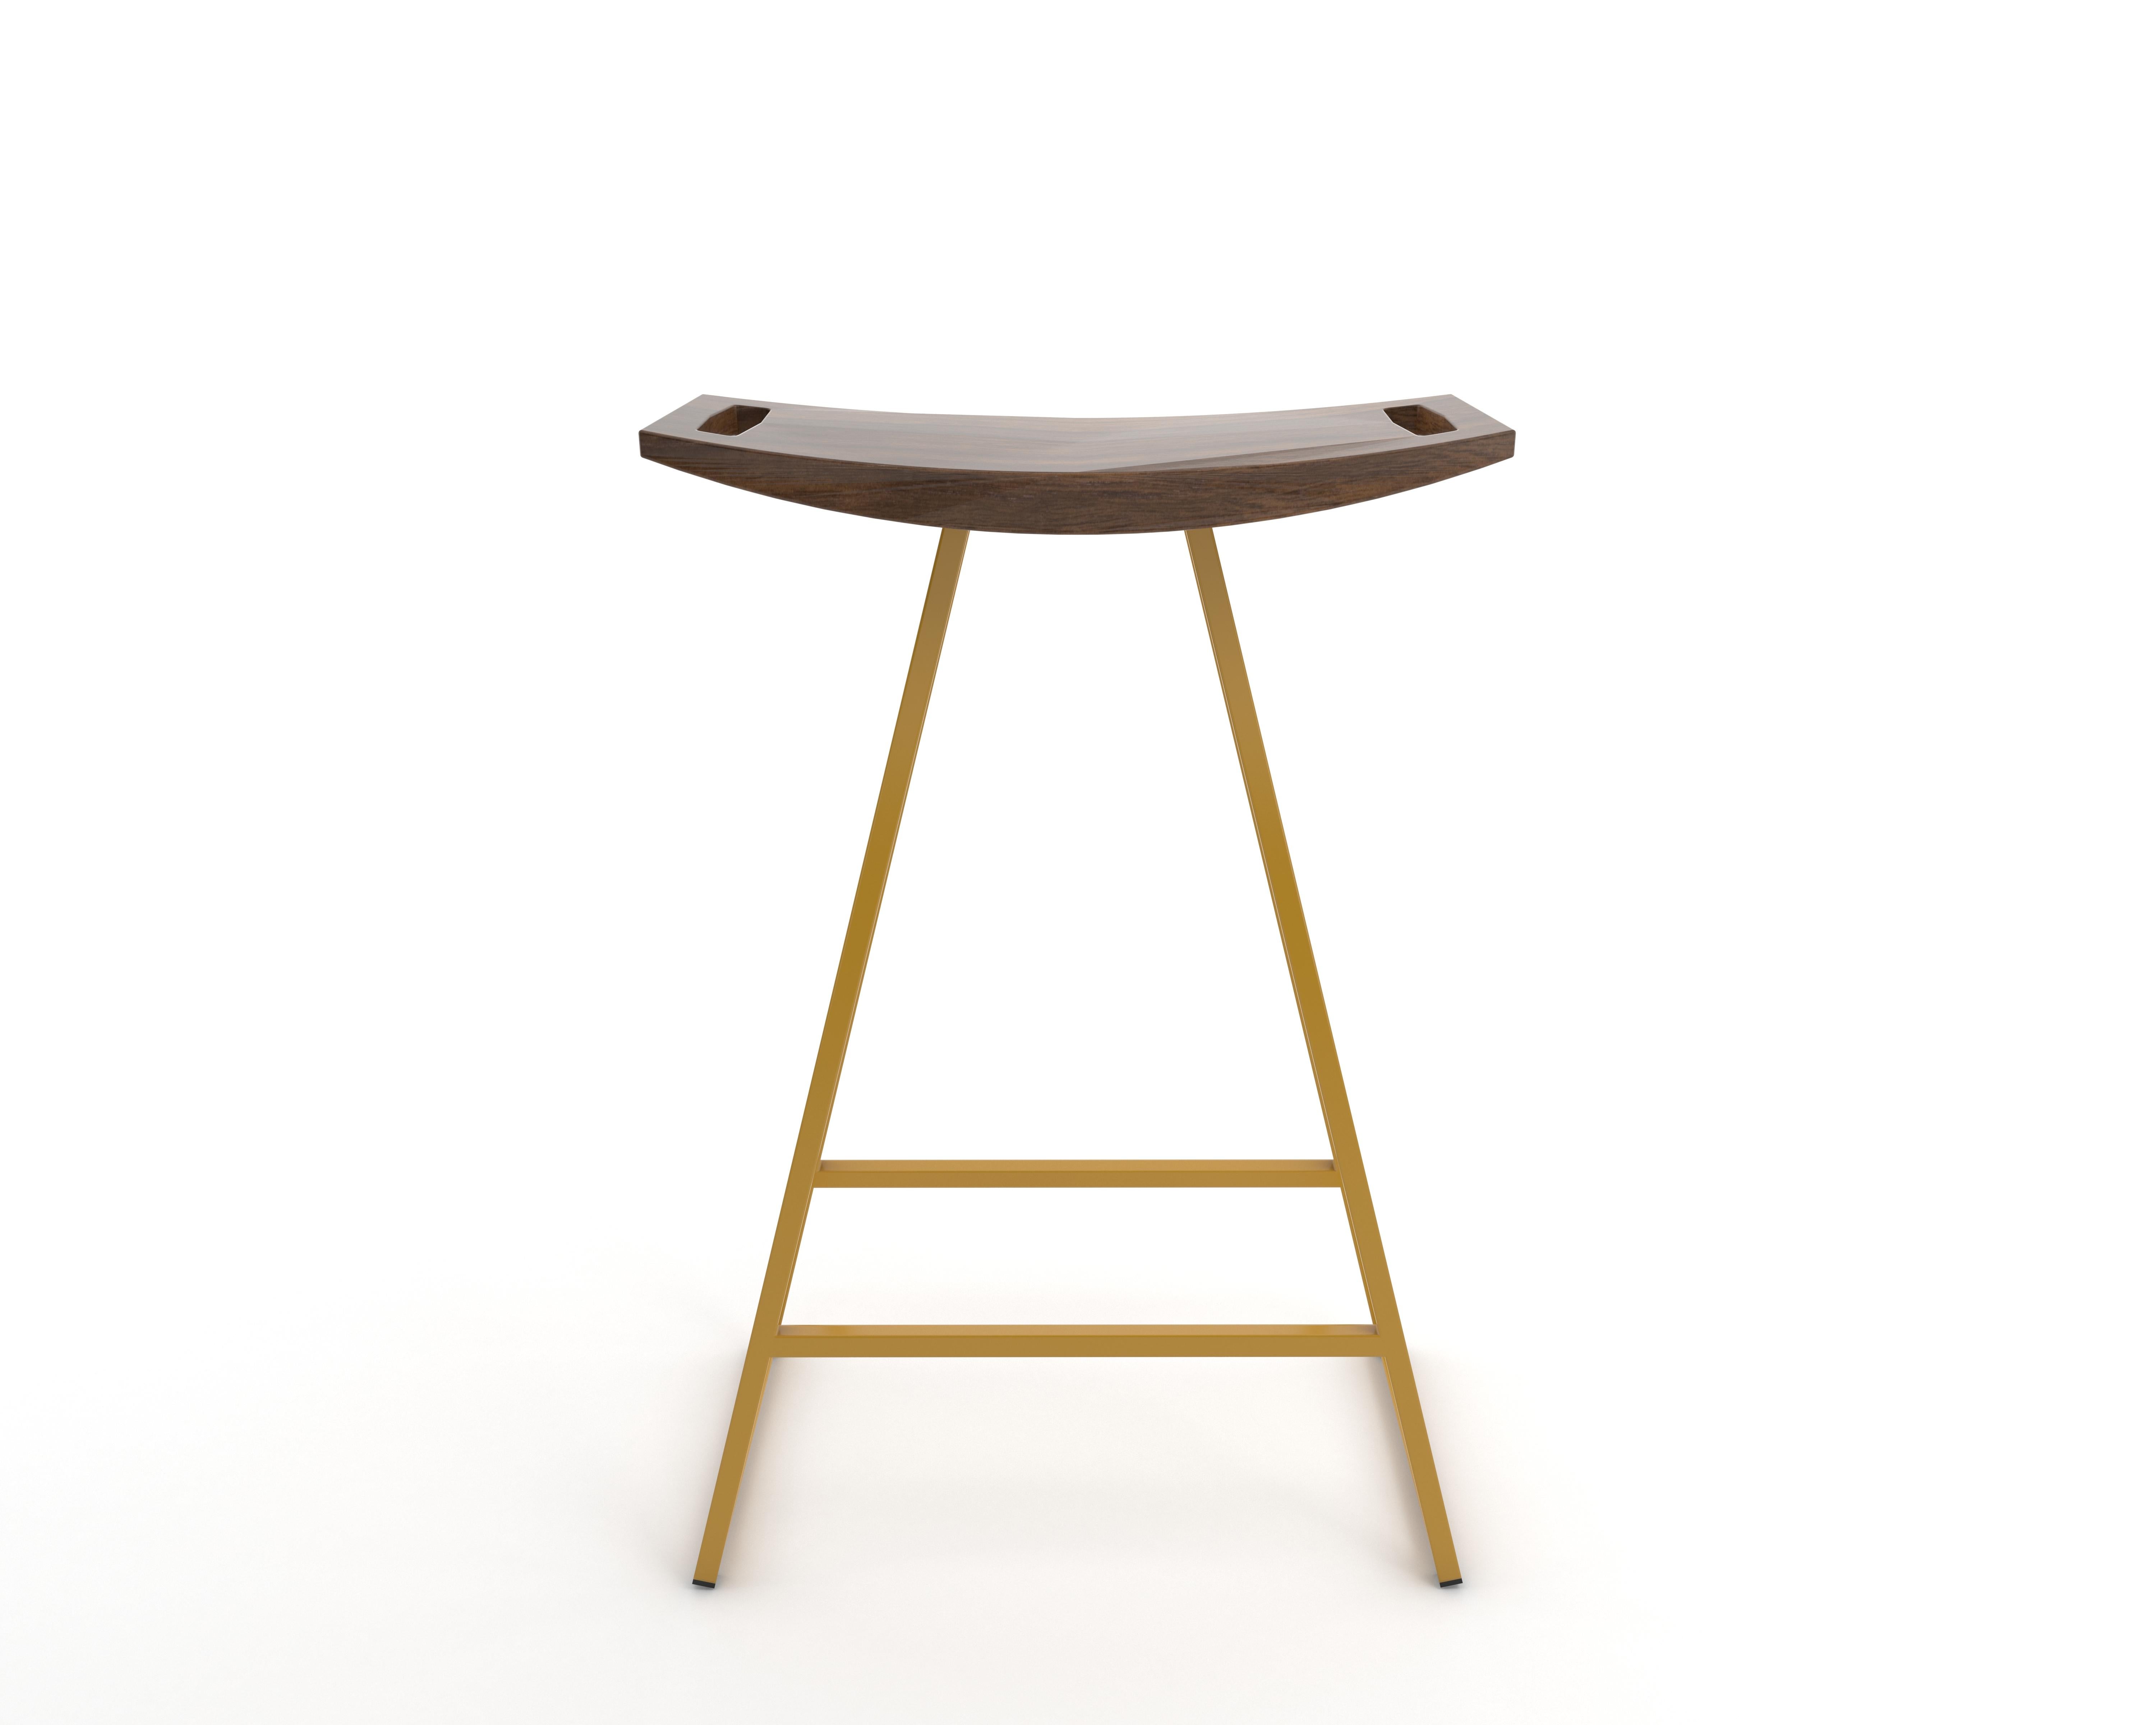 This sleek stool has a thin carved wooden seat that rests on a steel tubing base. The elegant seat is curved for seamless comfort while displaying a stunning intersecting diagonal accent inlay. This eye-catching and durable piece will make any